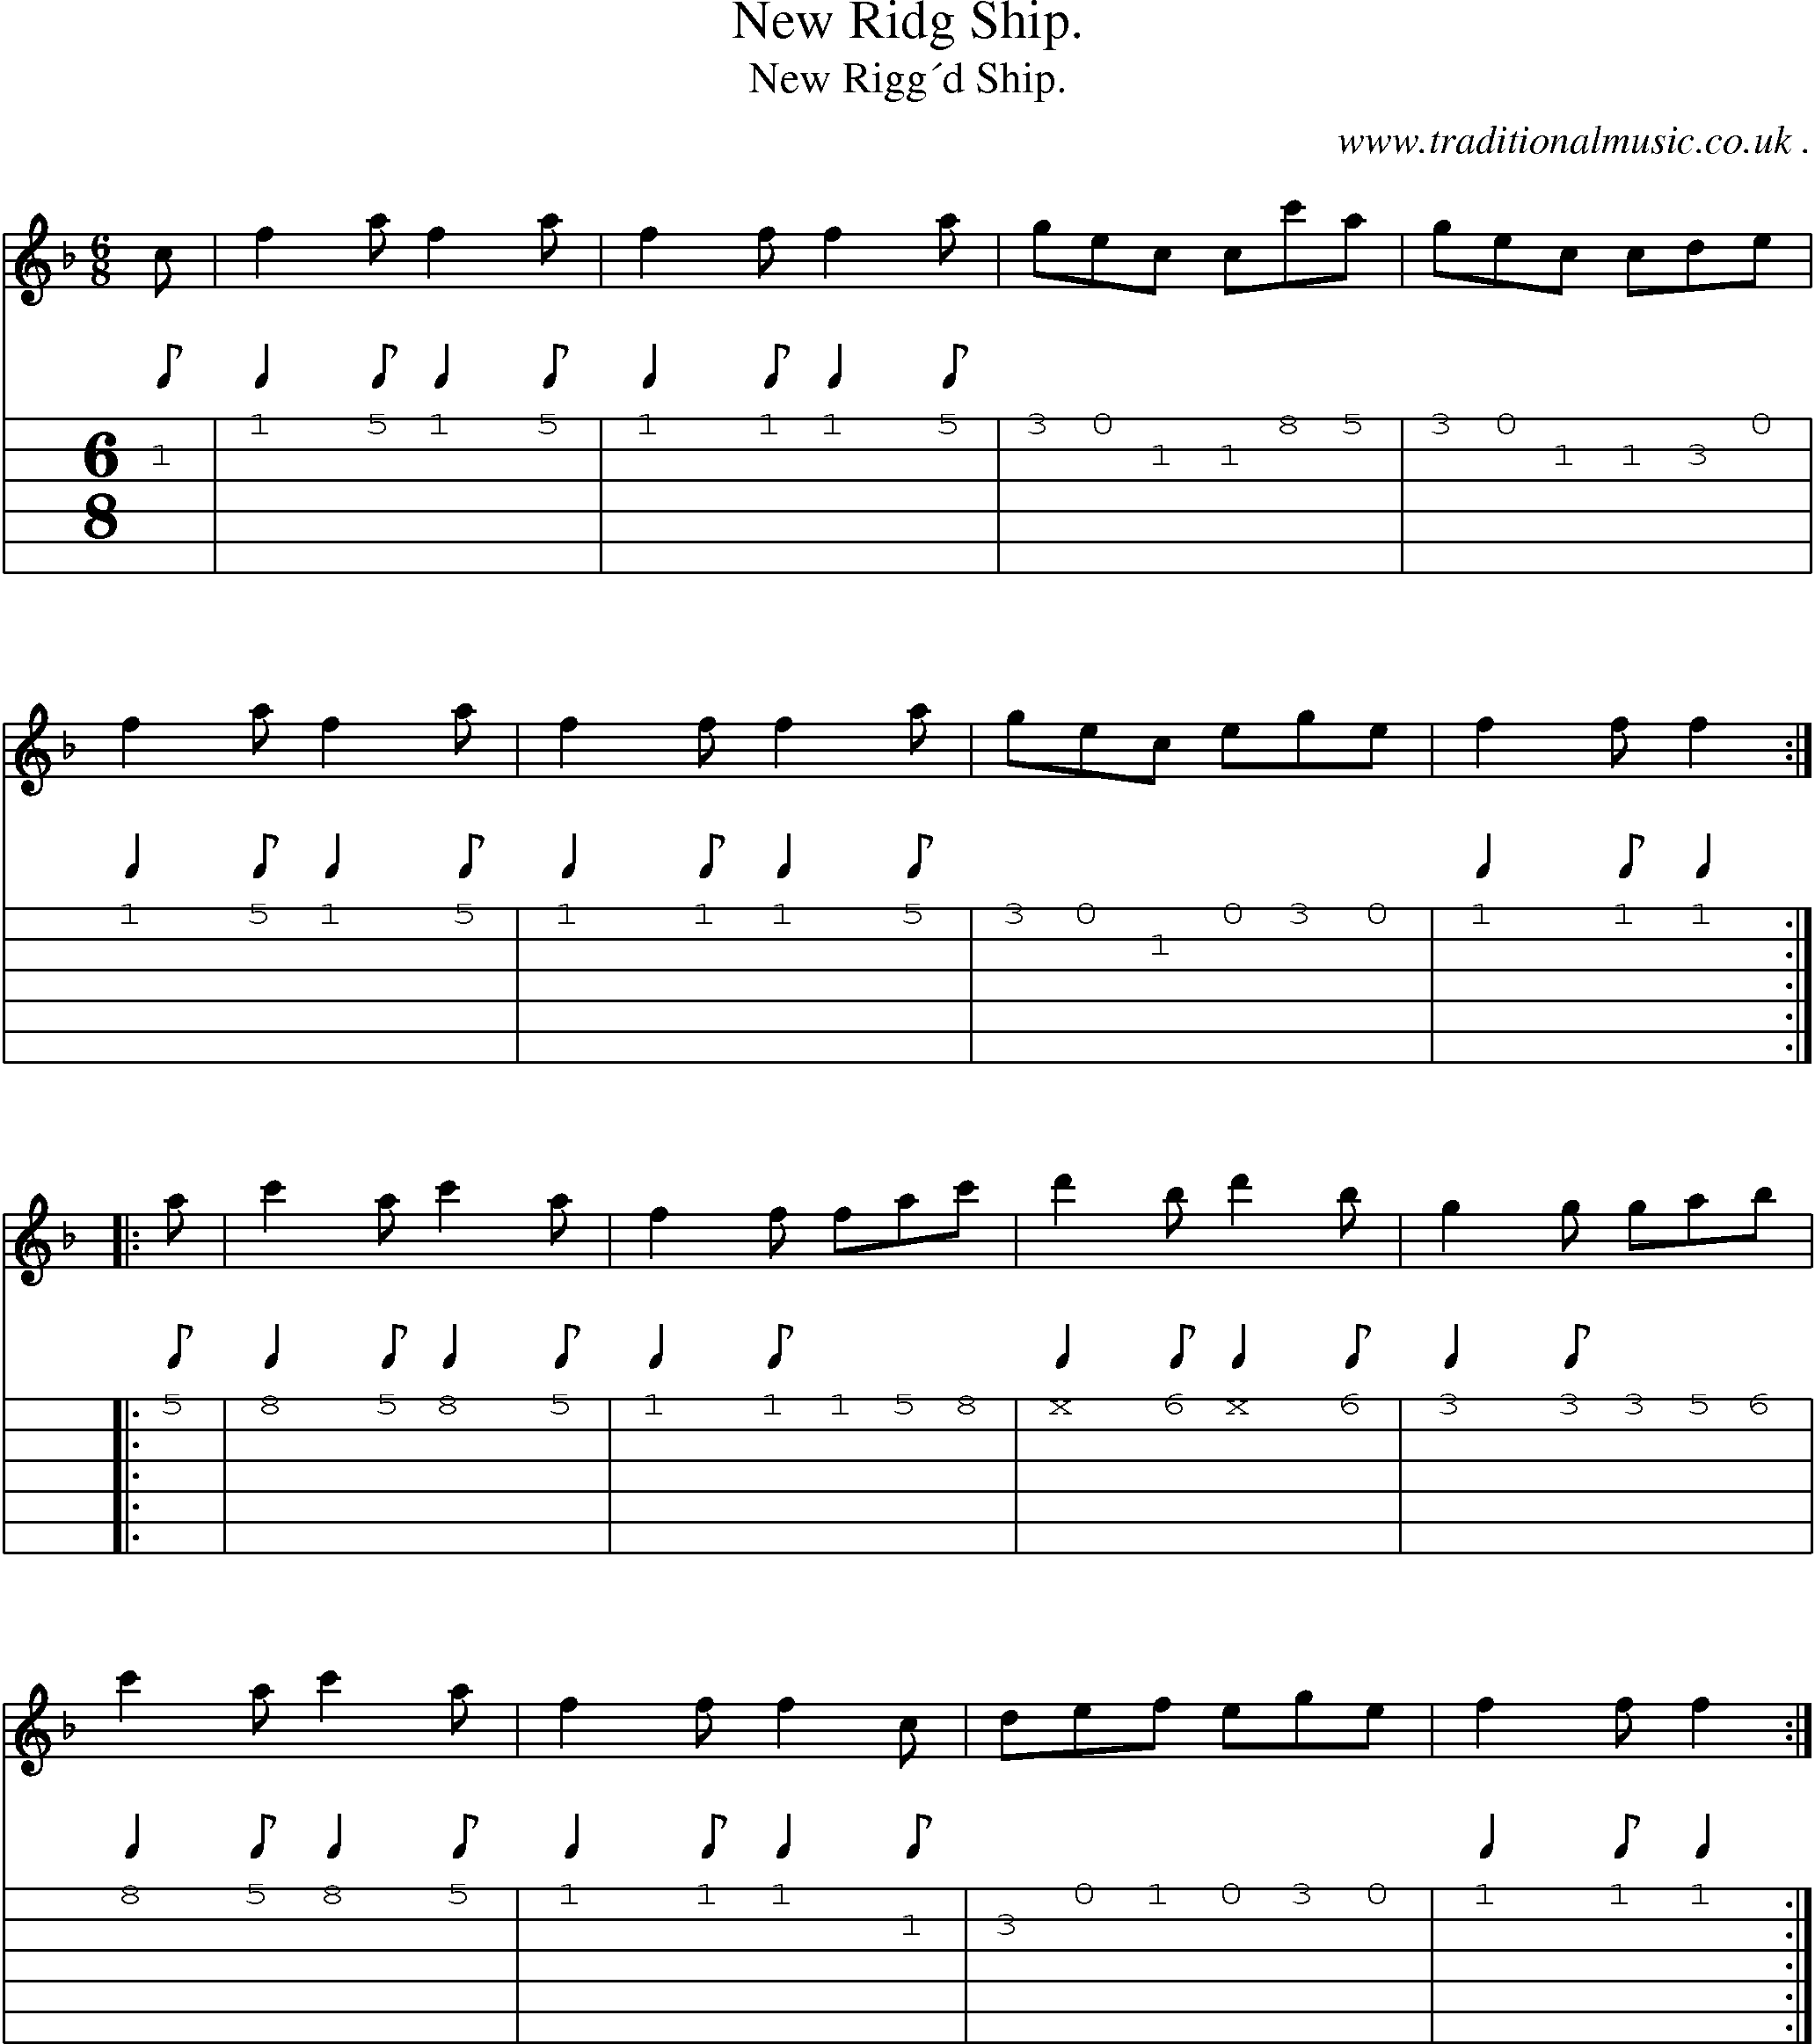 Sheet-Music and Guitar Tabs for New Ridg Ship